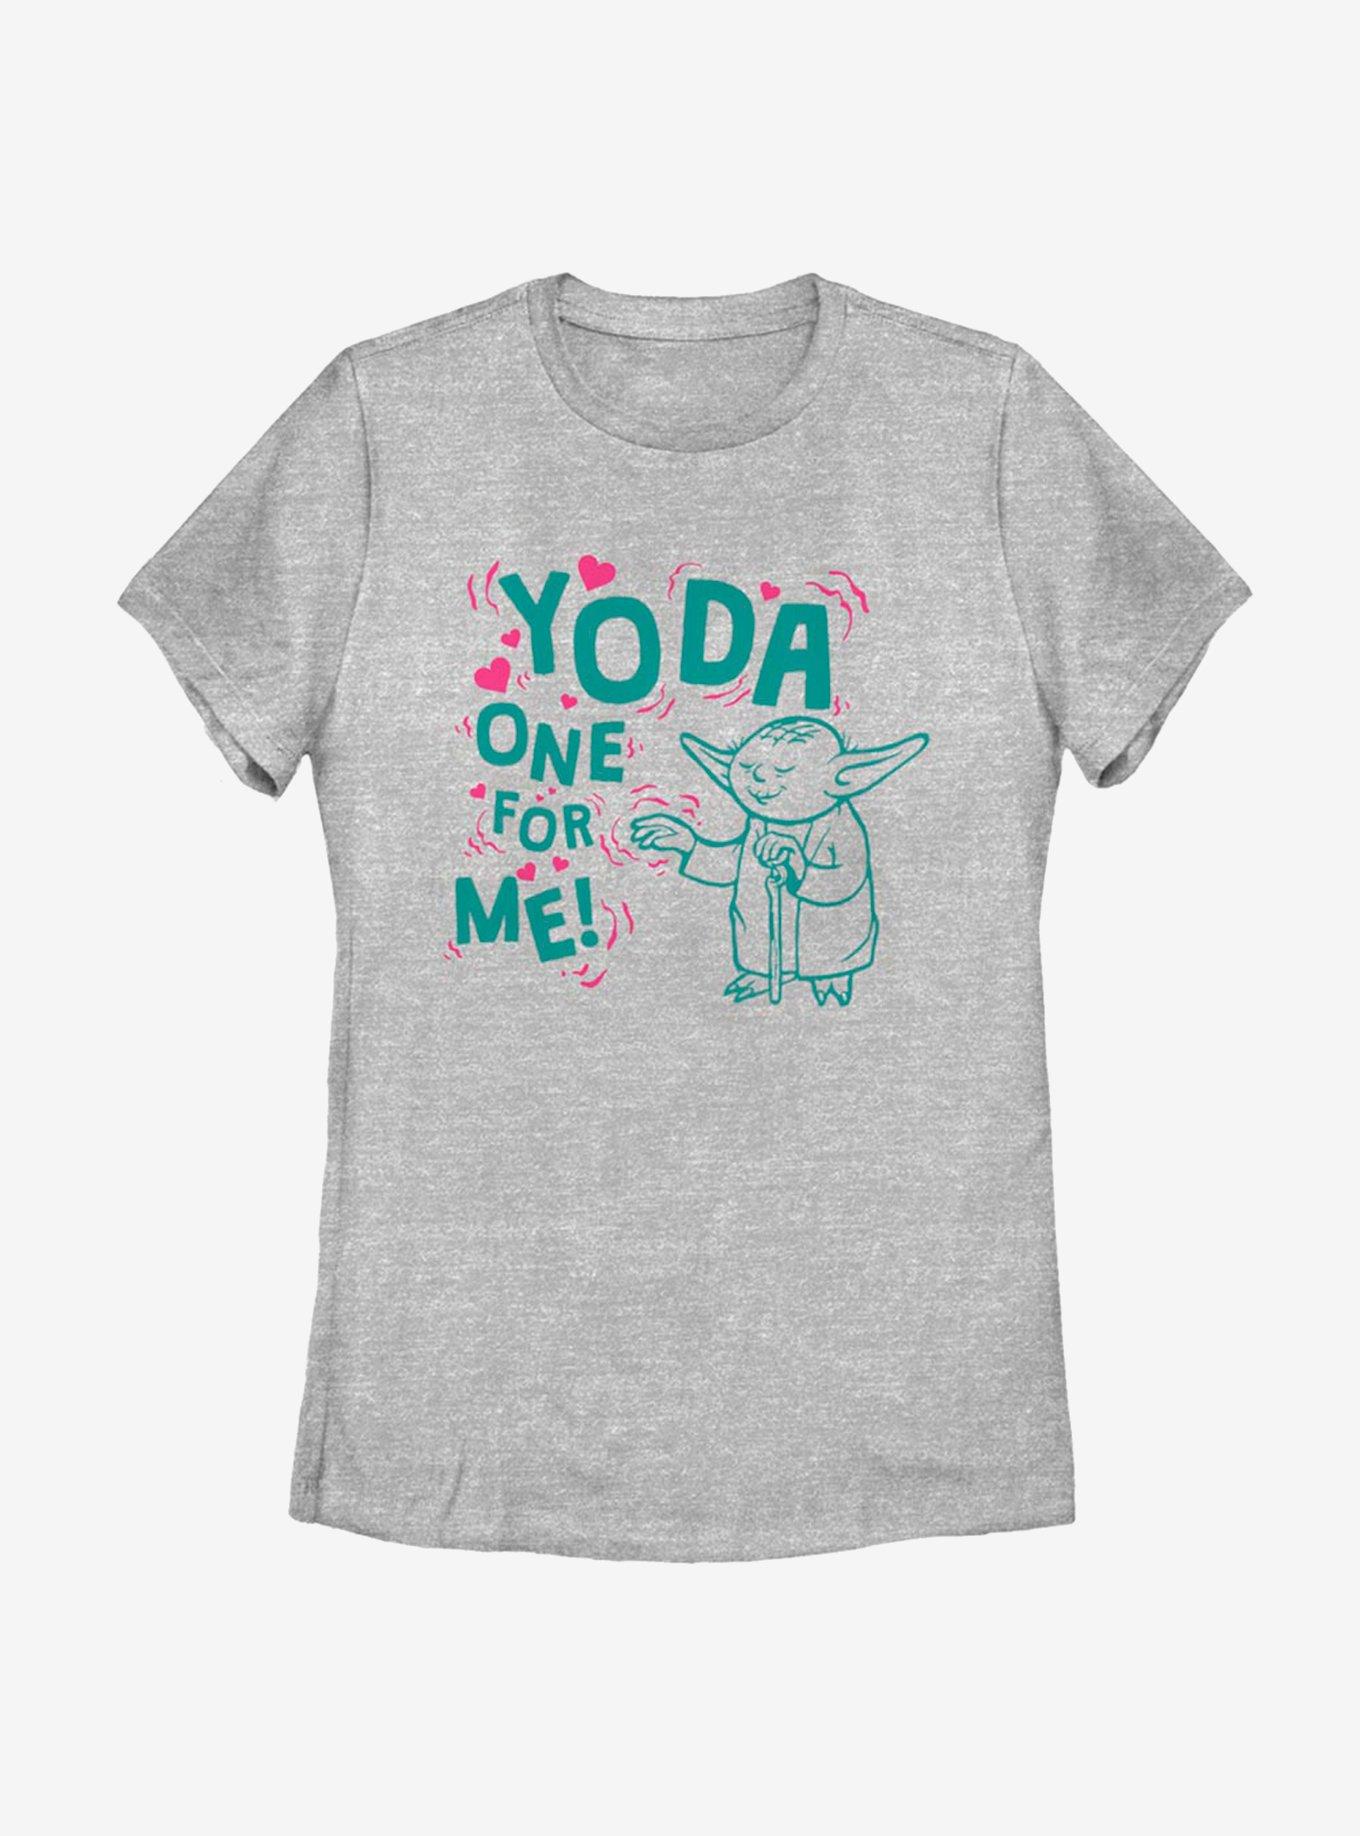 Star Wars Yoda One For Me Outline Womens T-Shirt, ATH HTR, hi-res